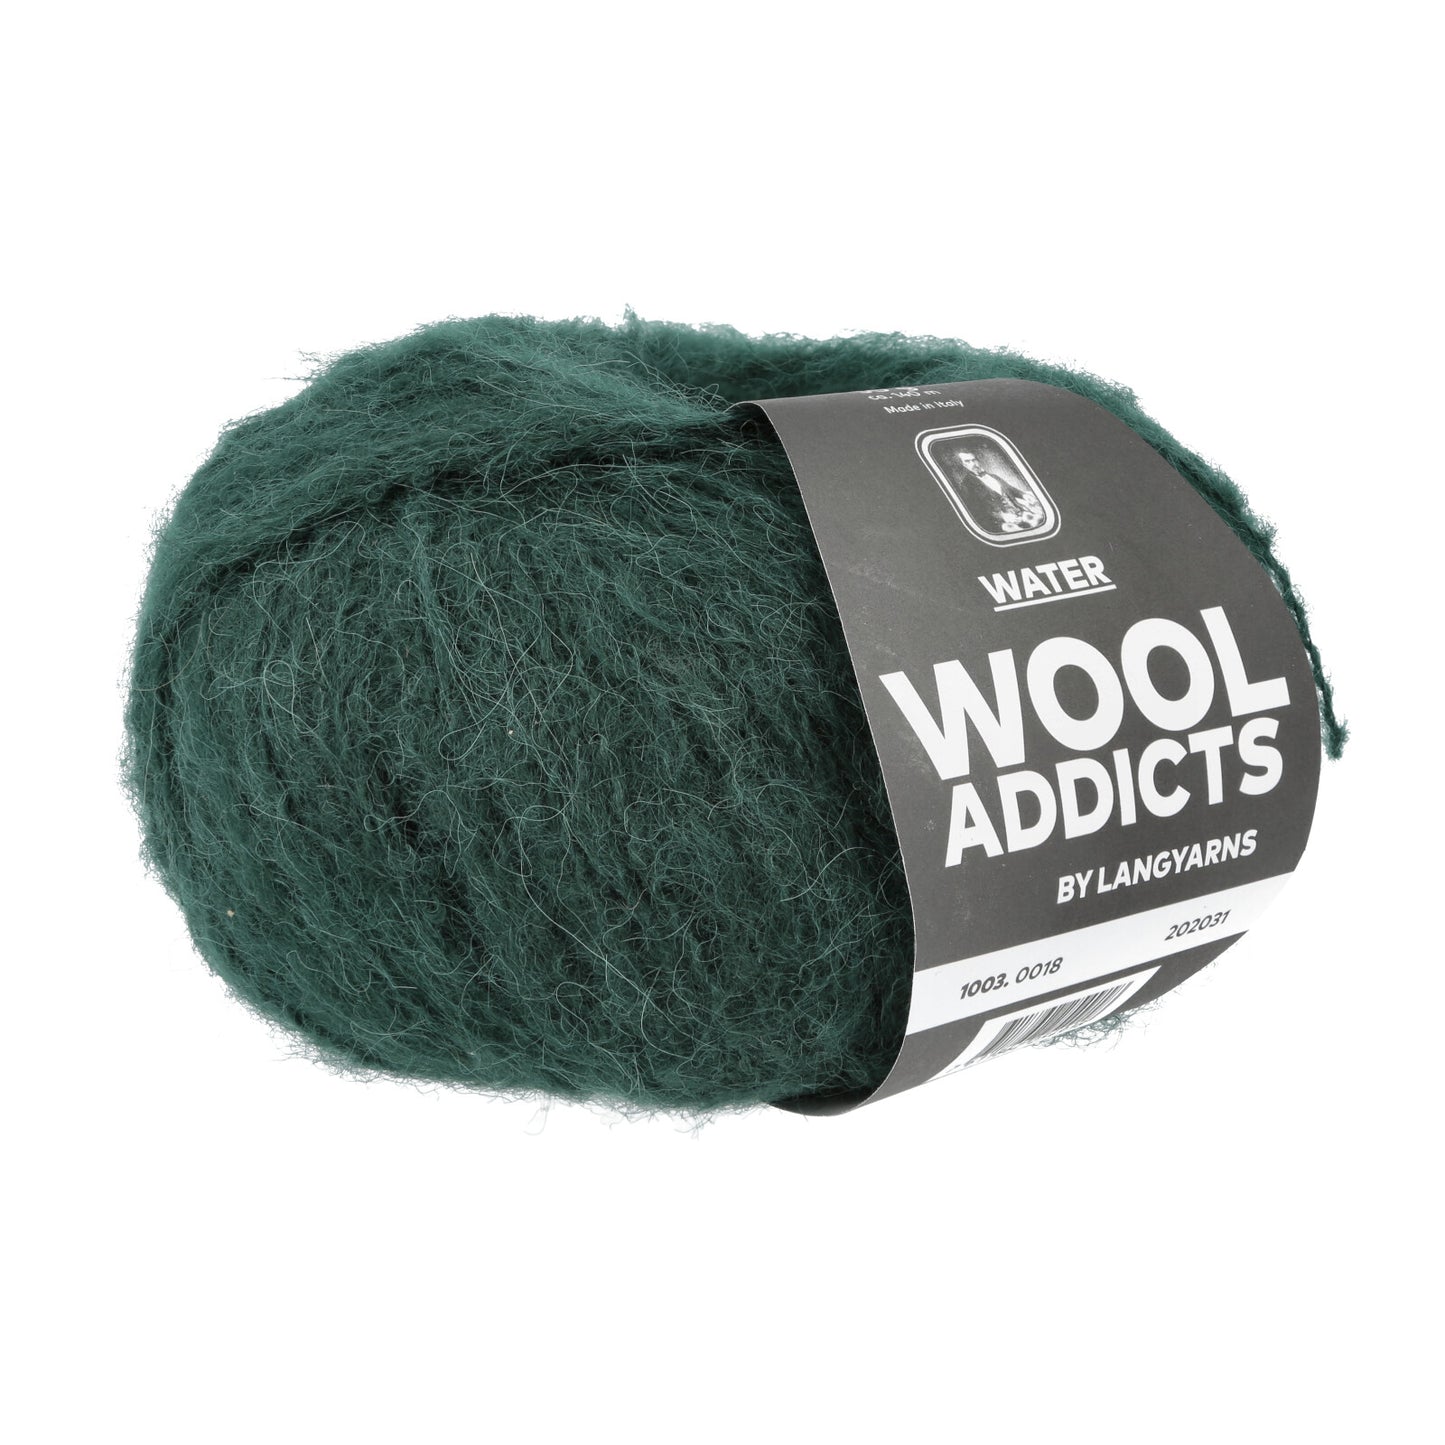 Wool Addicts Water in Colour 0018